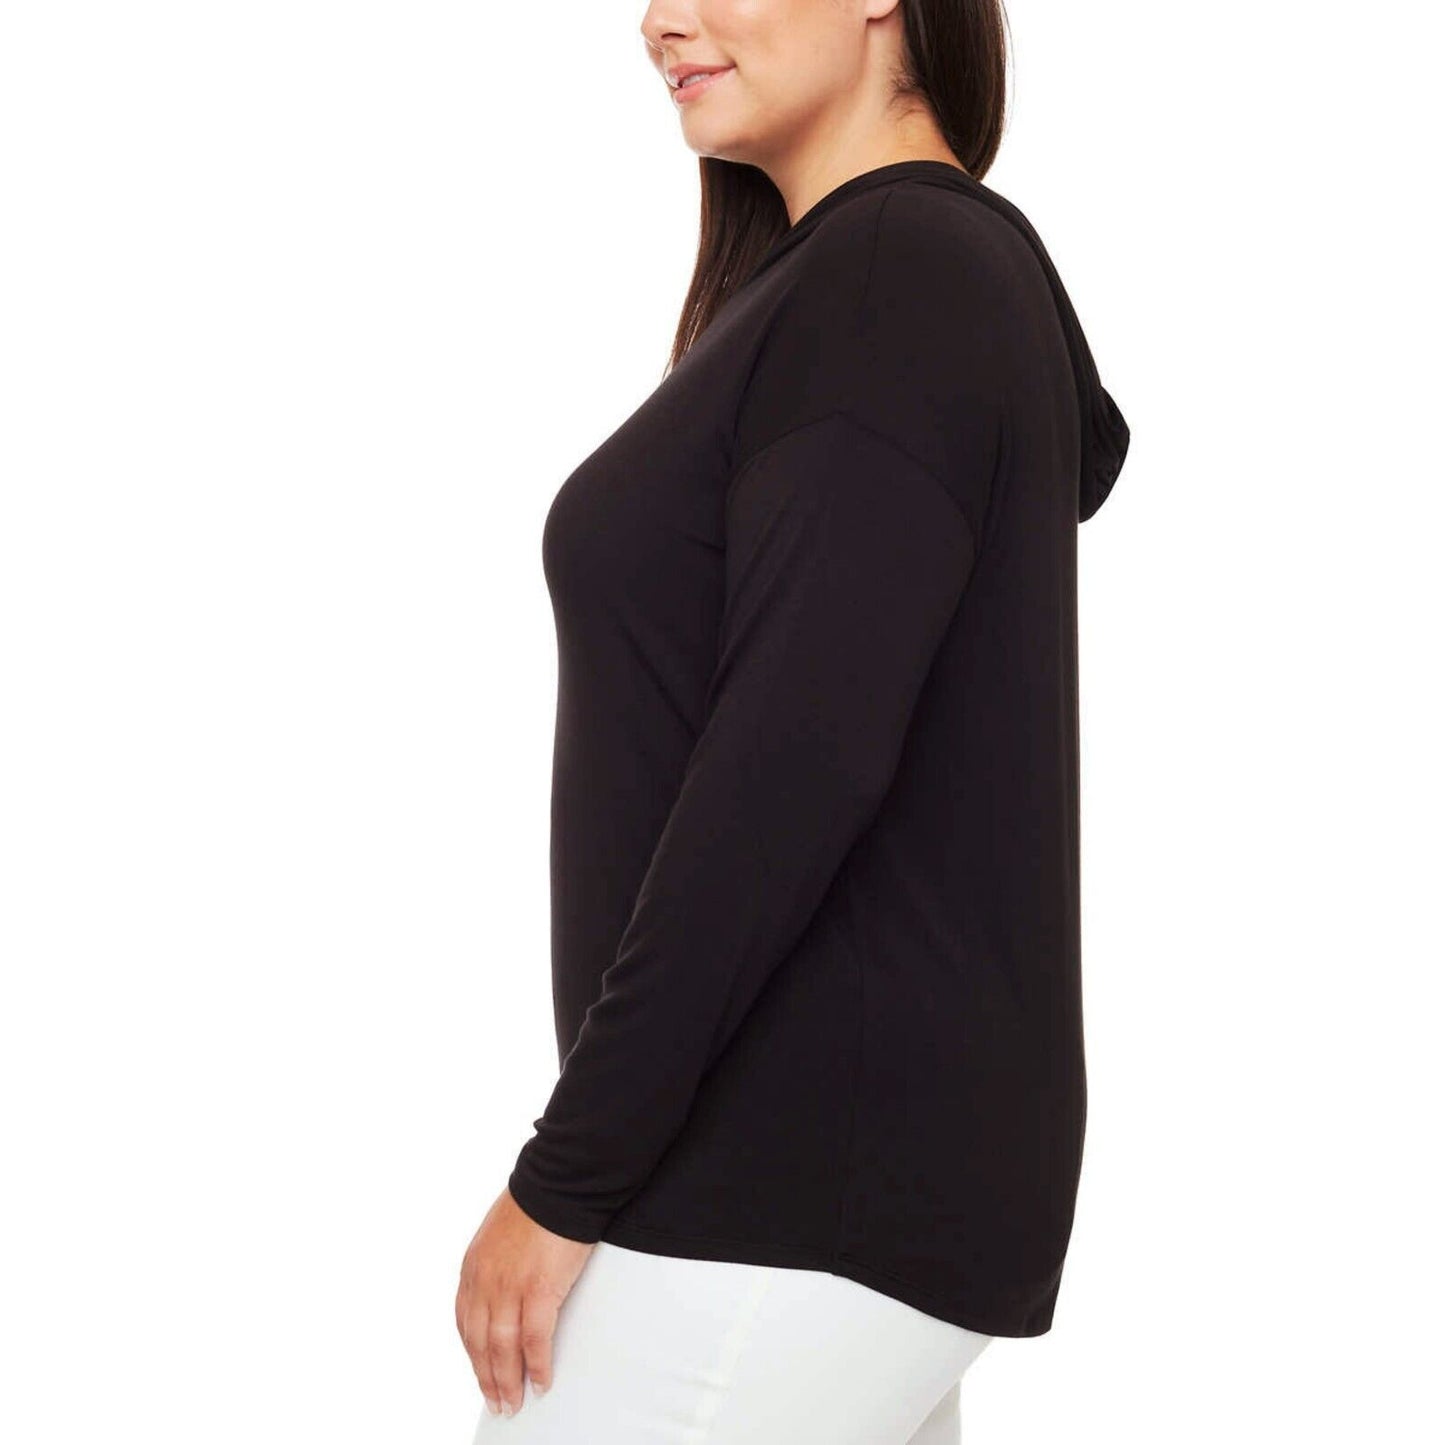 S.C. & CO Soft Lightweight Relaxed Fit Sweatshirt Hoodie